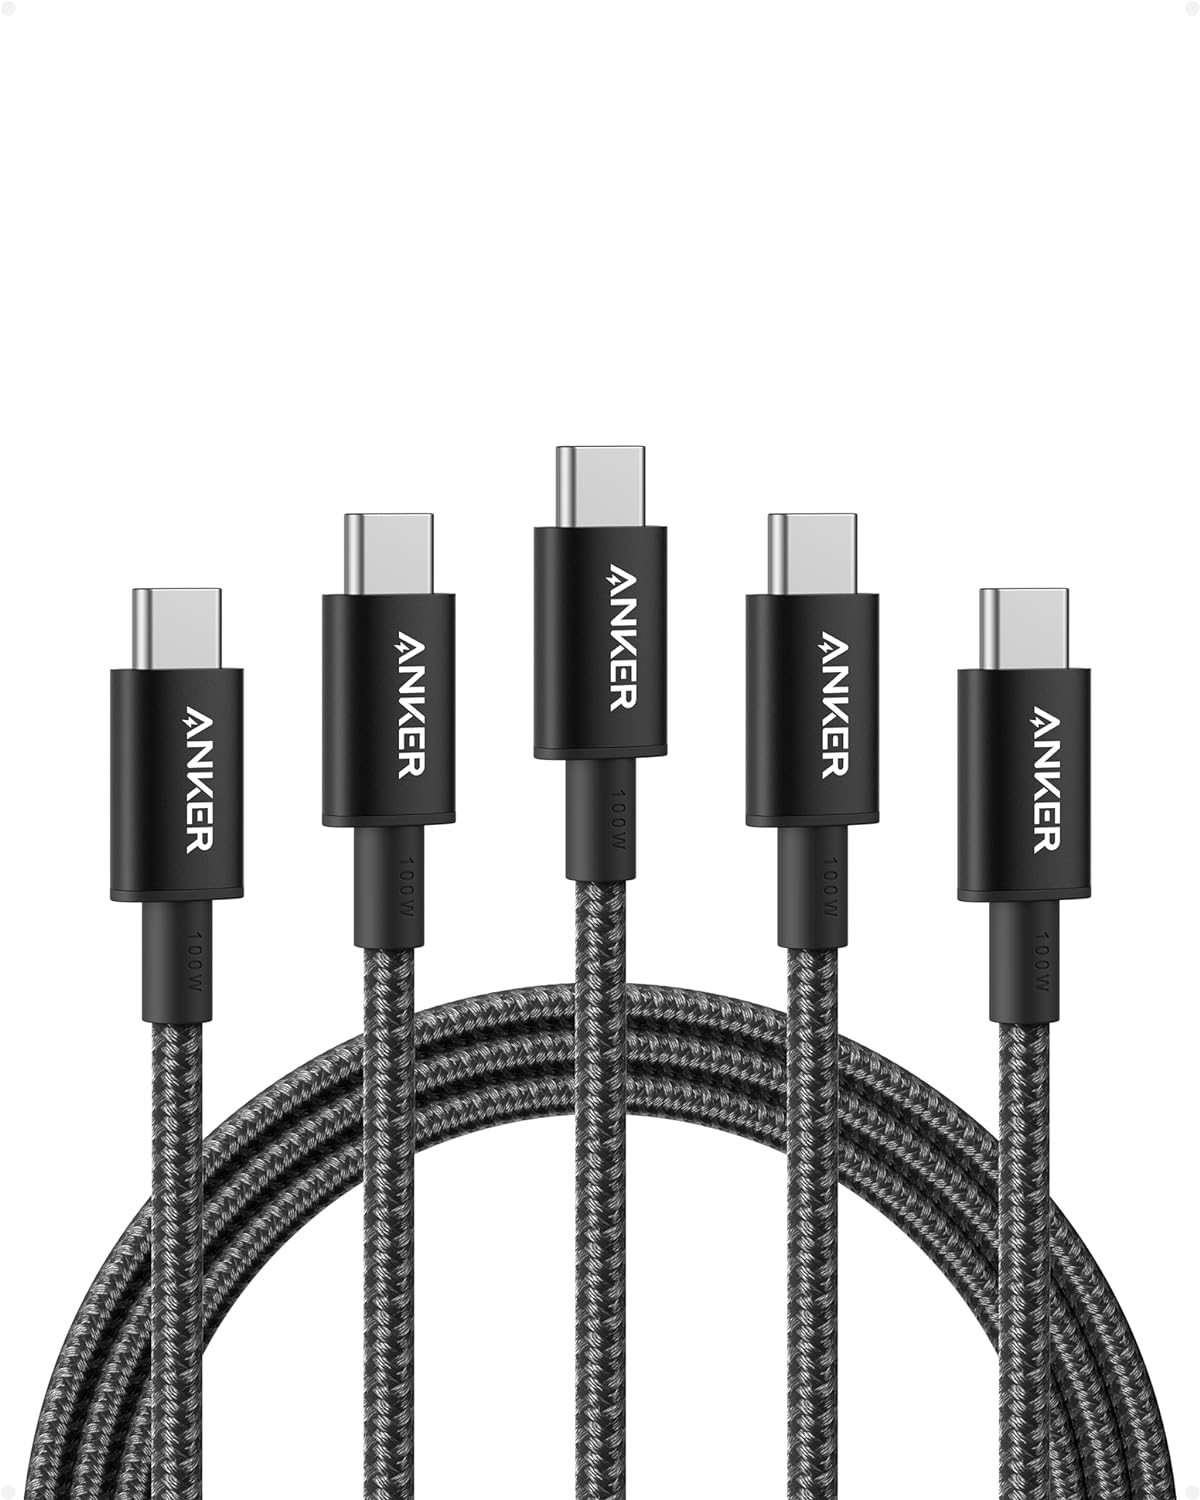 Amazon.com: Anker USB C Charger Cable (6ft 100W, 5Pack), Black, USB 2.0 Type C Fast Charging Cable $18.99